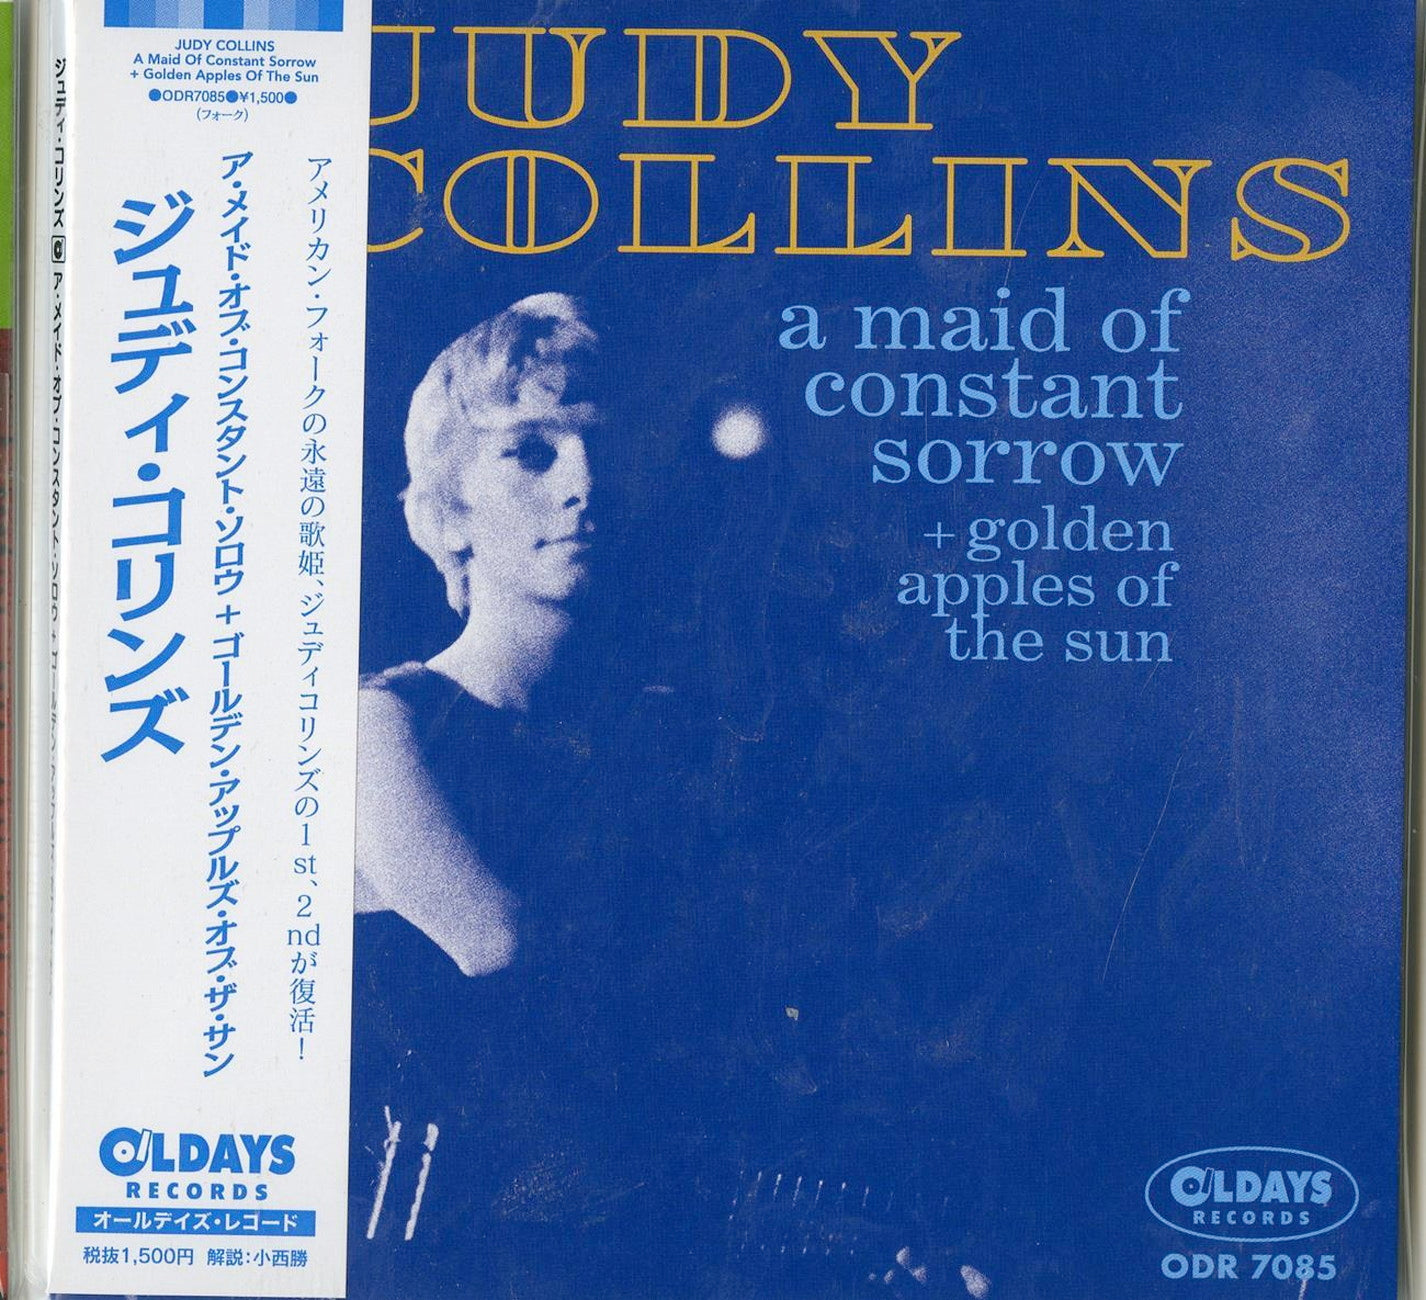 Judy Collins - A Maid Of Constant Sorrow + Golden Apples Of The Sun - Japan  Mini LP CD